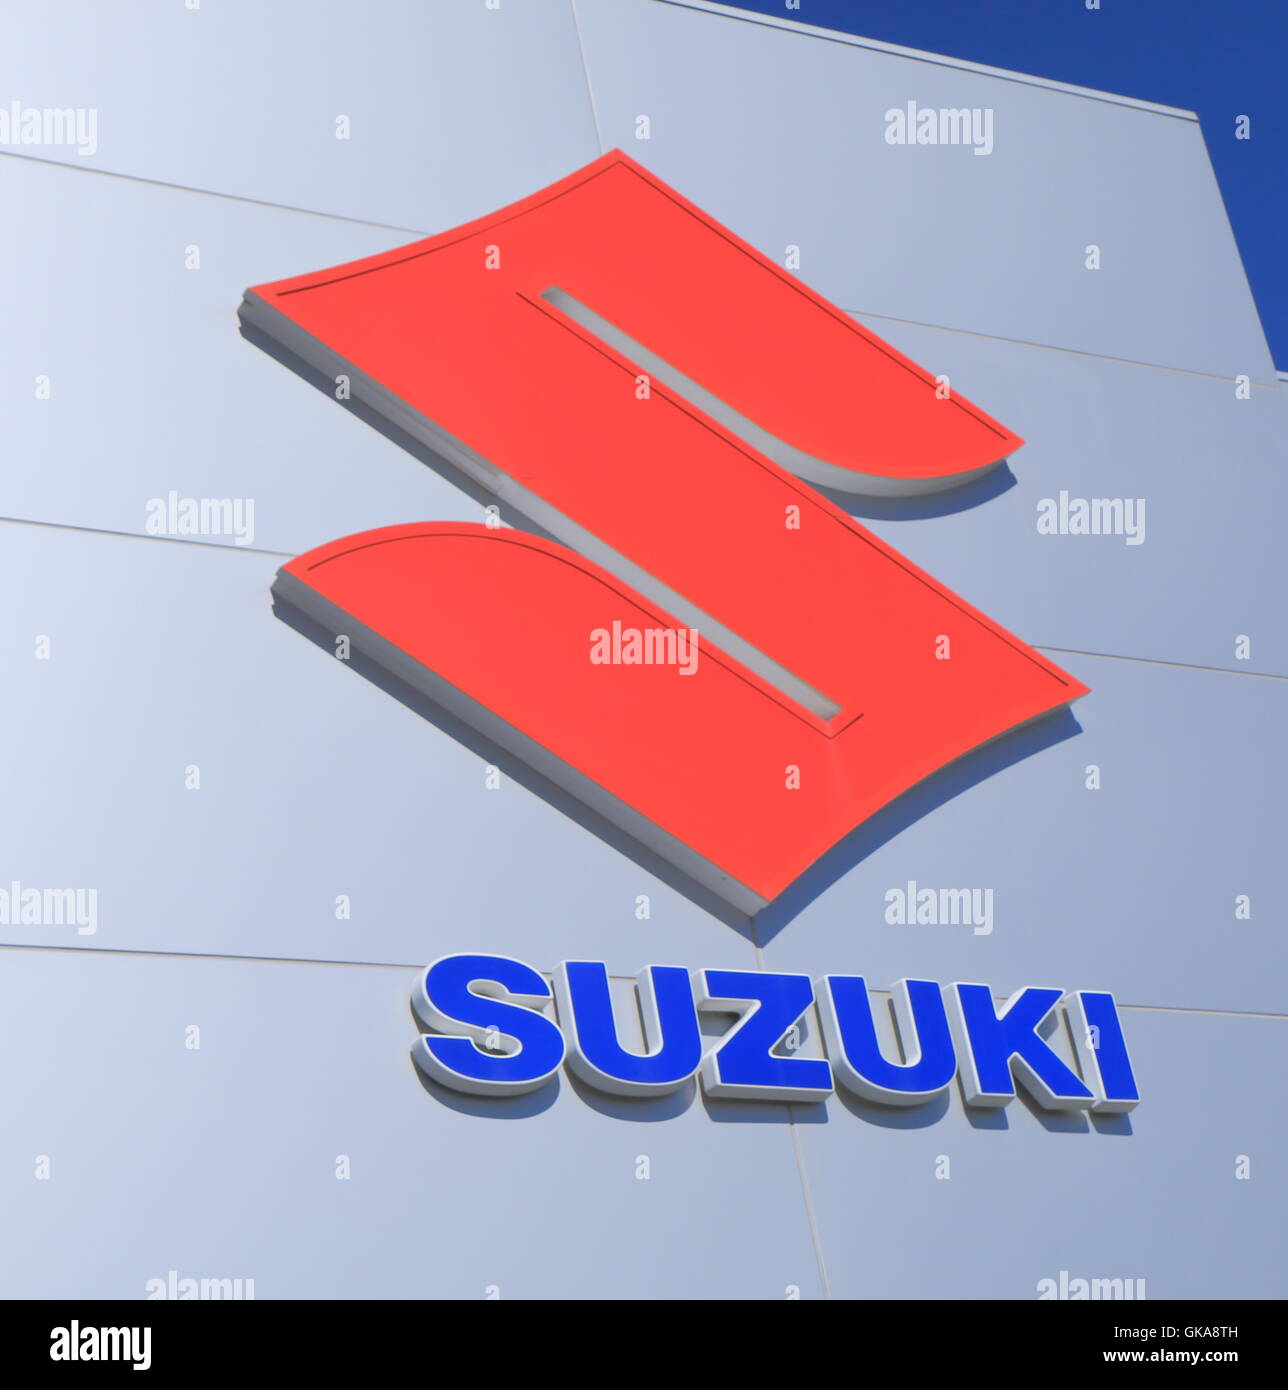 SUZUKI Car manufacture logo, Japanese multinational corporation specializing manufacturing automobiles founded in 1909. Stock Photo